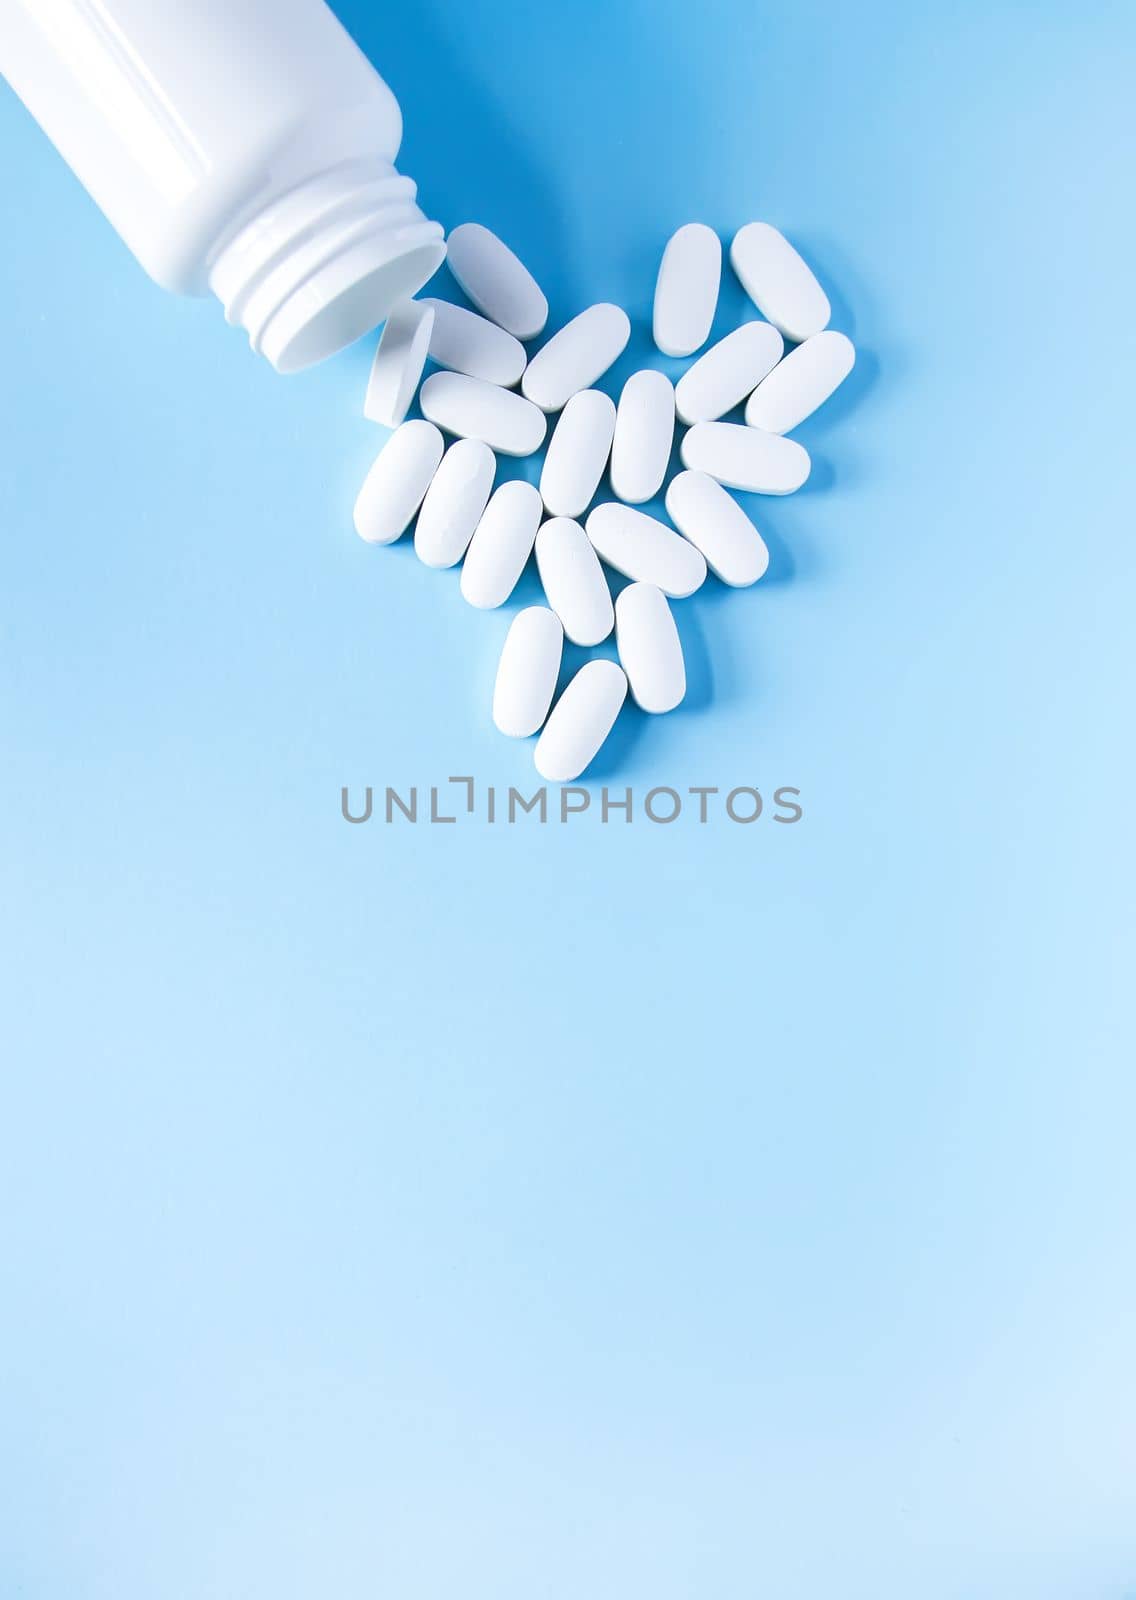 Pills of vitamin in the shape of heart with the opened white plastic container on soft blue background. by nightlyviolet